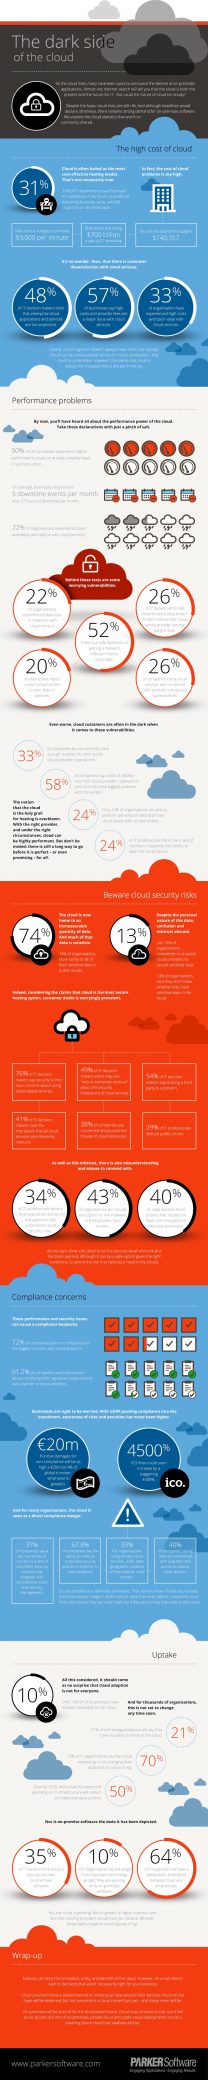 The Dark Side of the Cloud [Infographic]